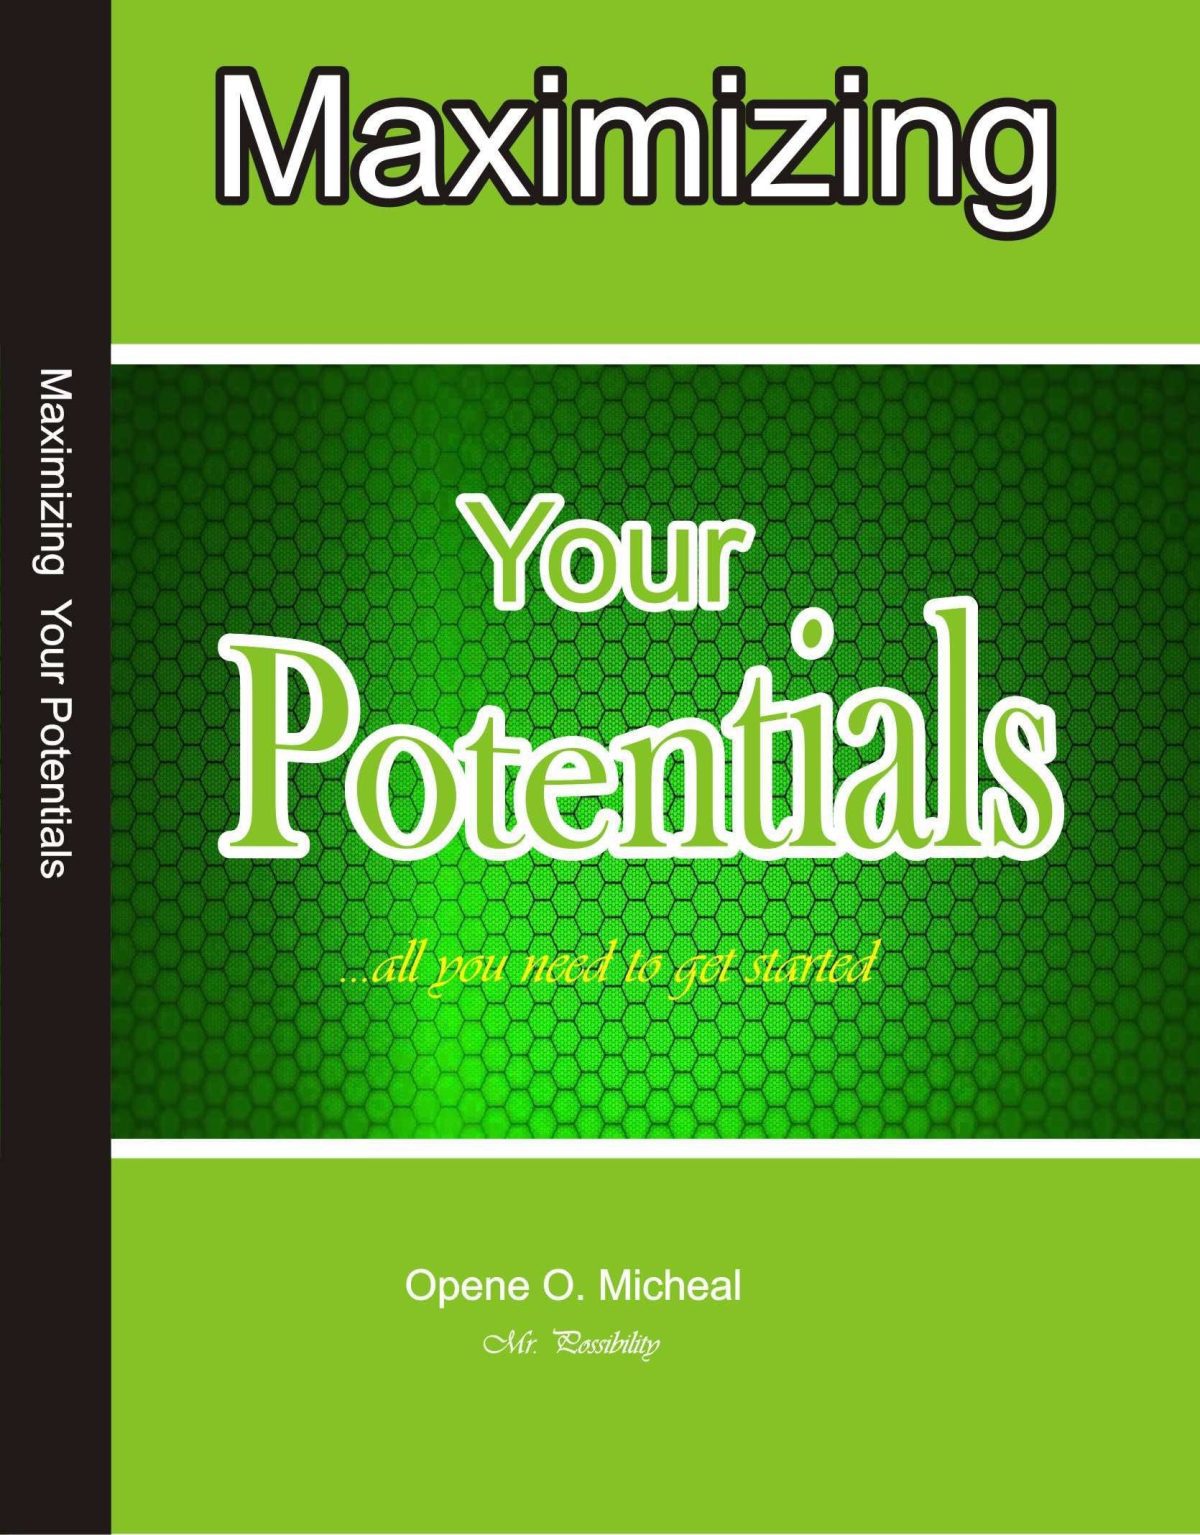 Maximising Your Potentials in ebook by Opene O. Micheal